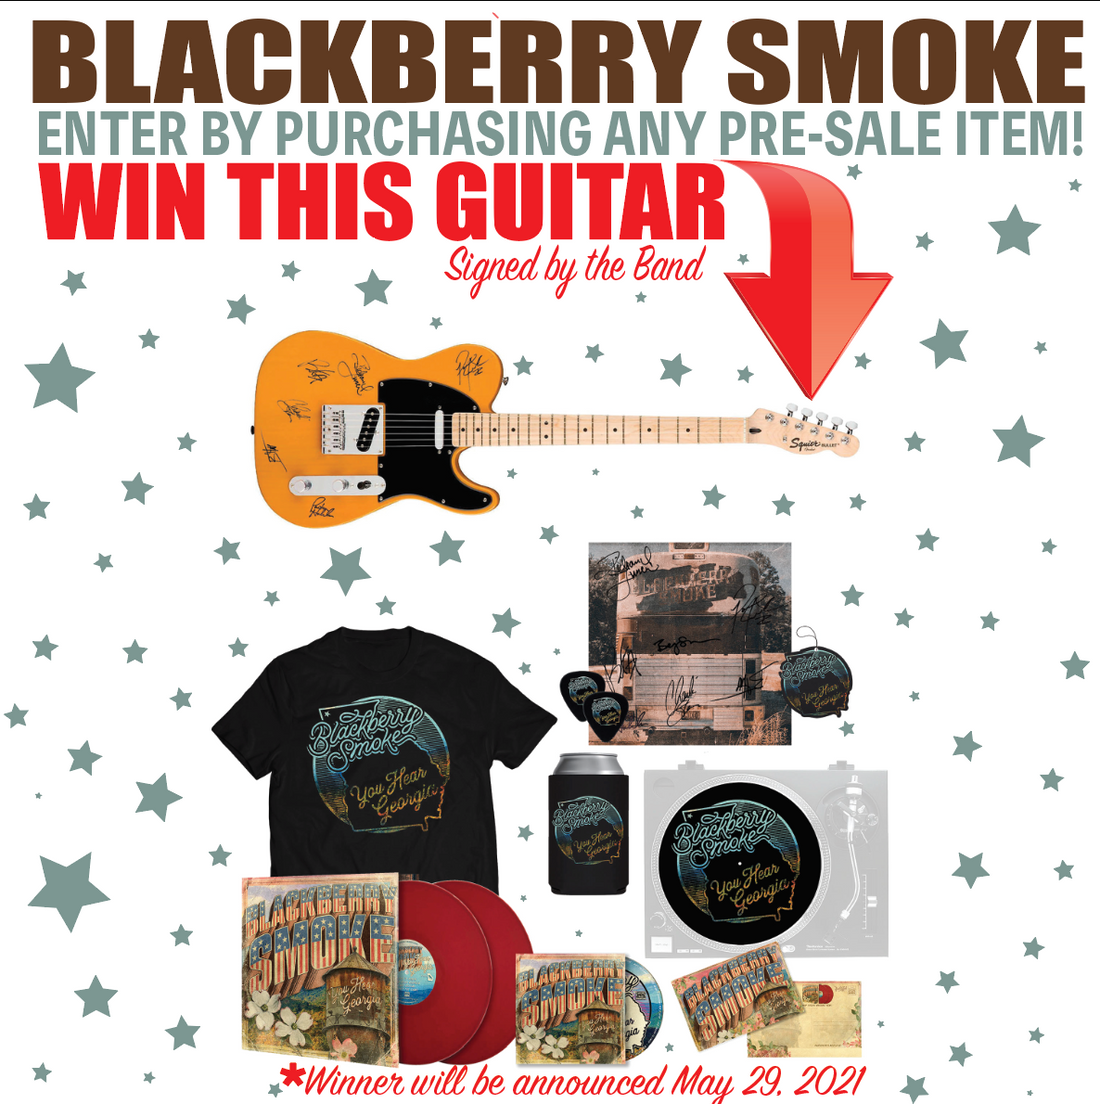 WIN THIS AUTOGRAPHED BLACKBERRY SMOKE GUITAR